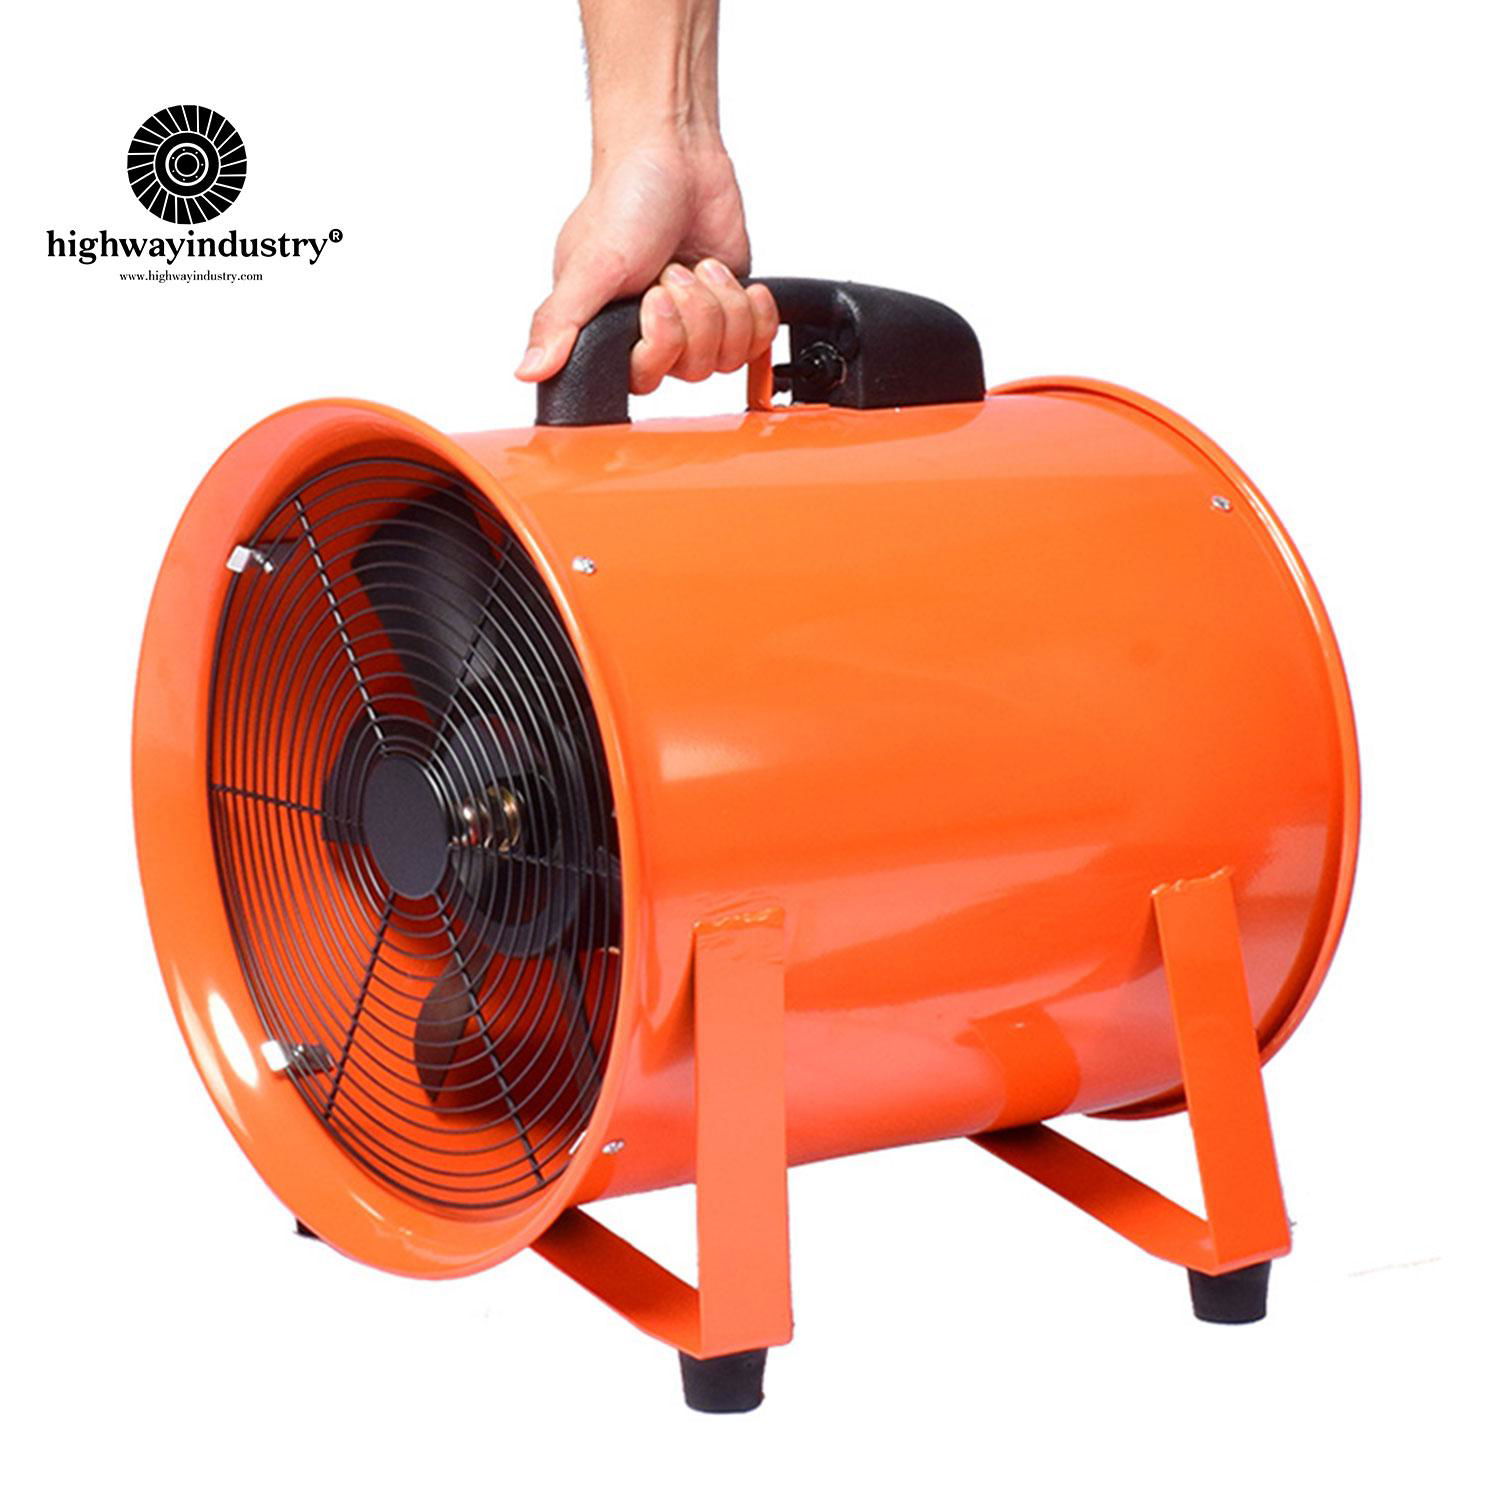 Highway Manufacturer explosion-proof portable turbine axial flow fan 3